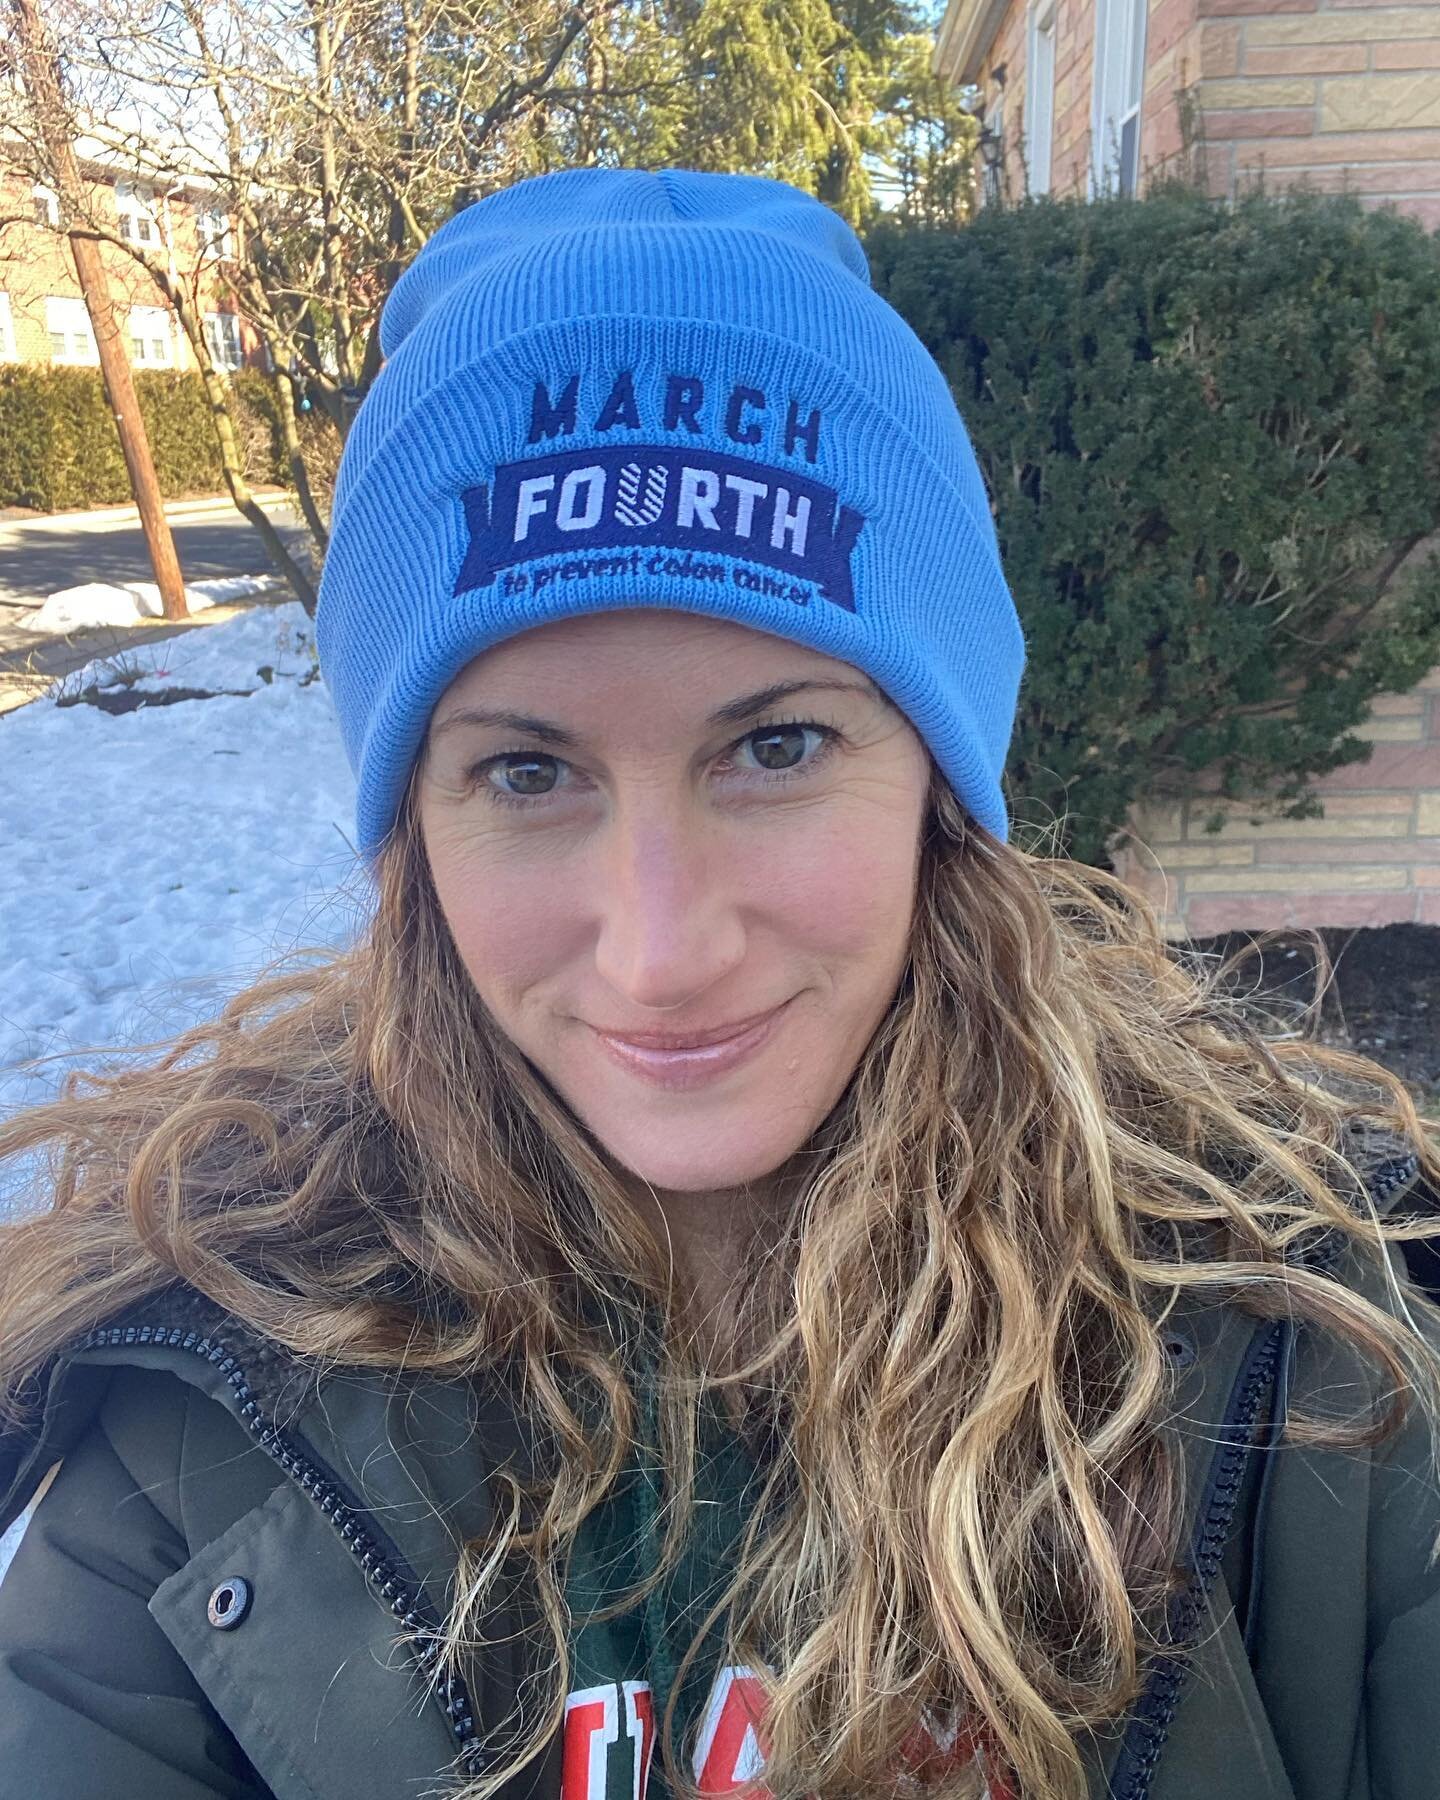 New beanie for #dressinblueday 
to bring awareness to colorectal cancer and support @marchfourthforjoanna and @colorectalcanceralliance&rsquo;s mission to prevent this awful disease. Did you know the recommended age for colorectal screening has been 